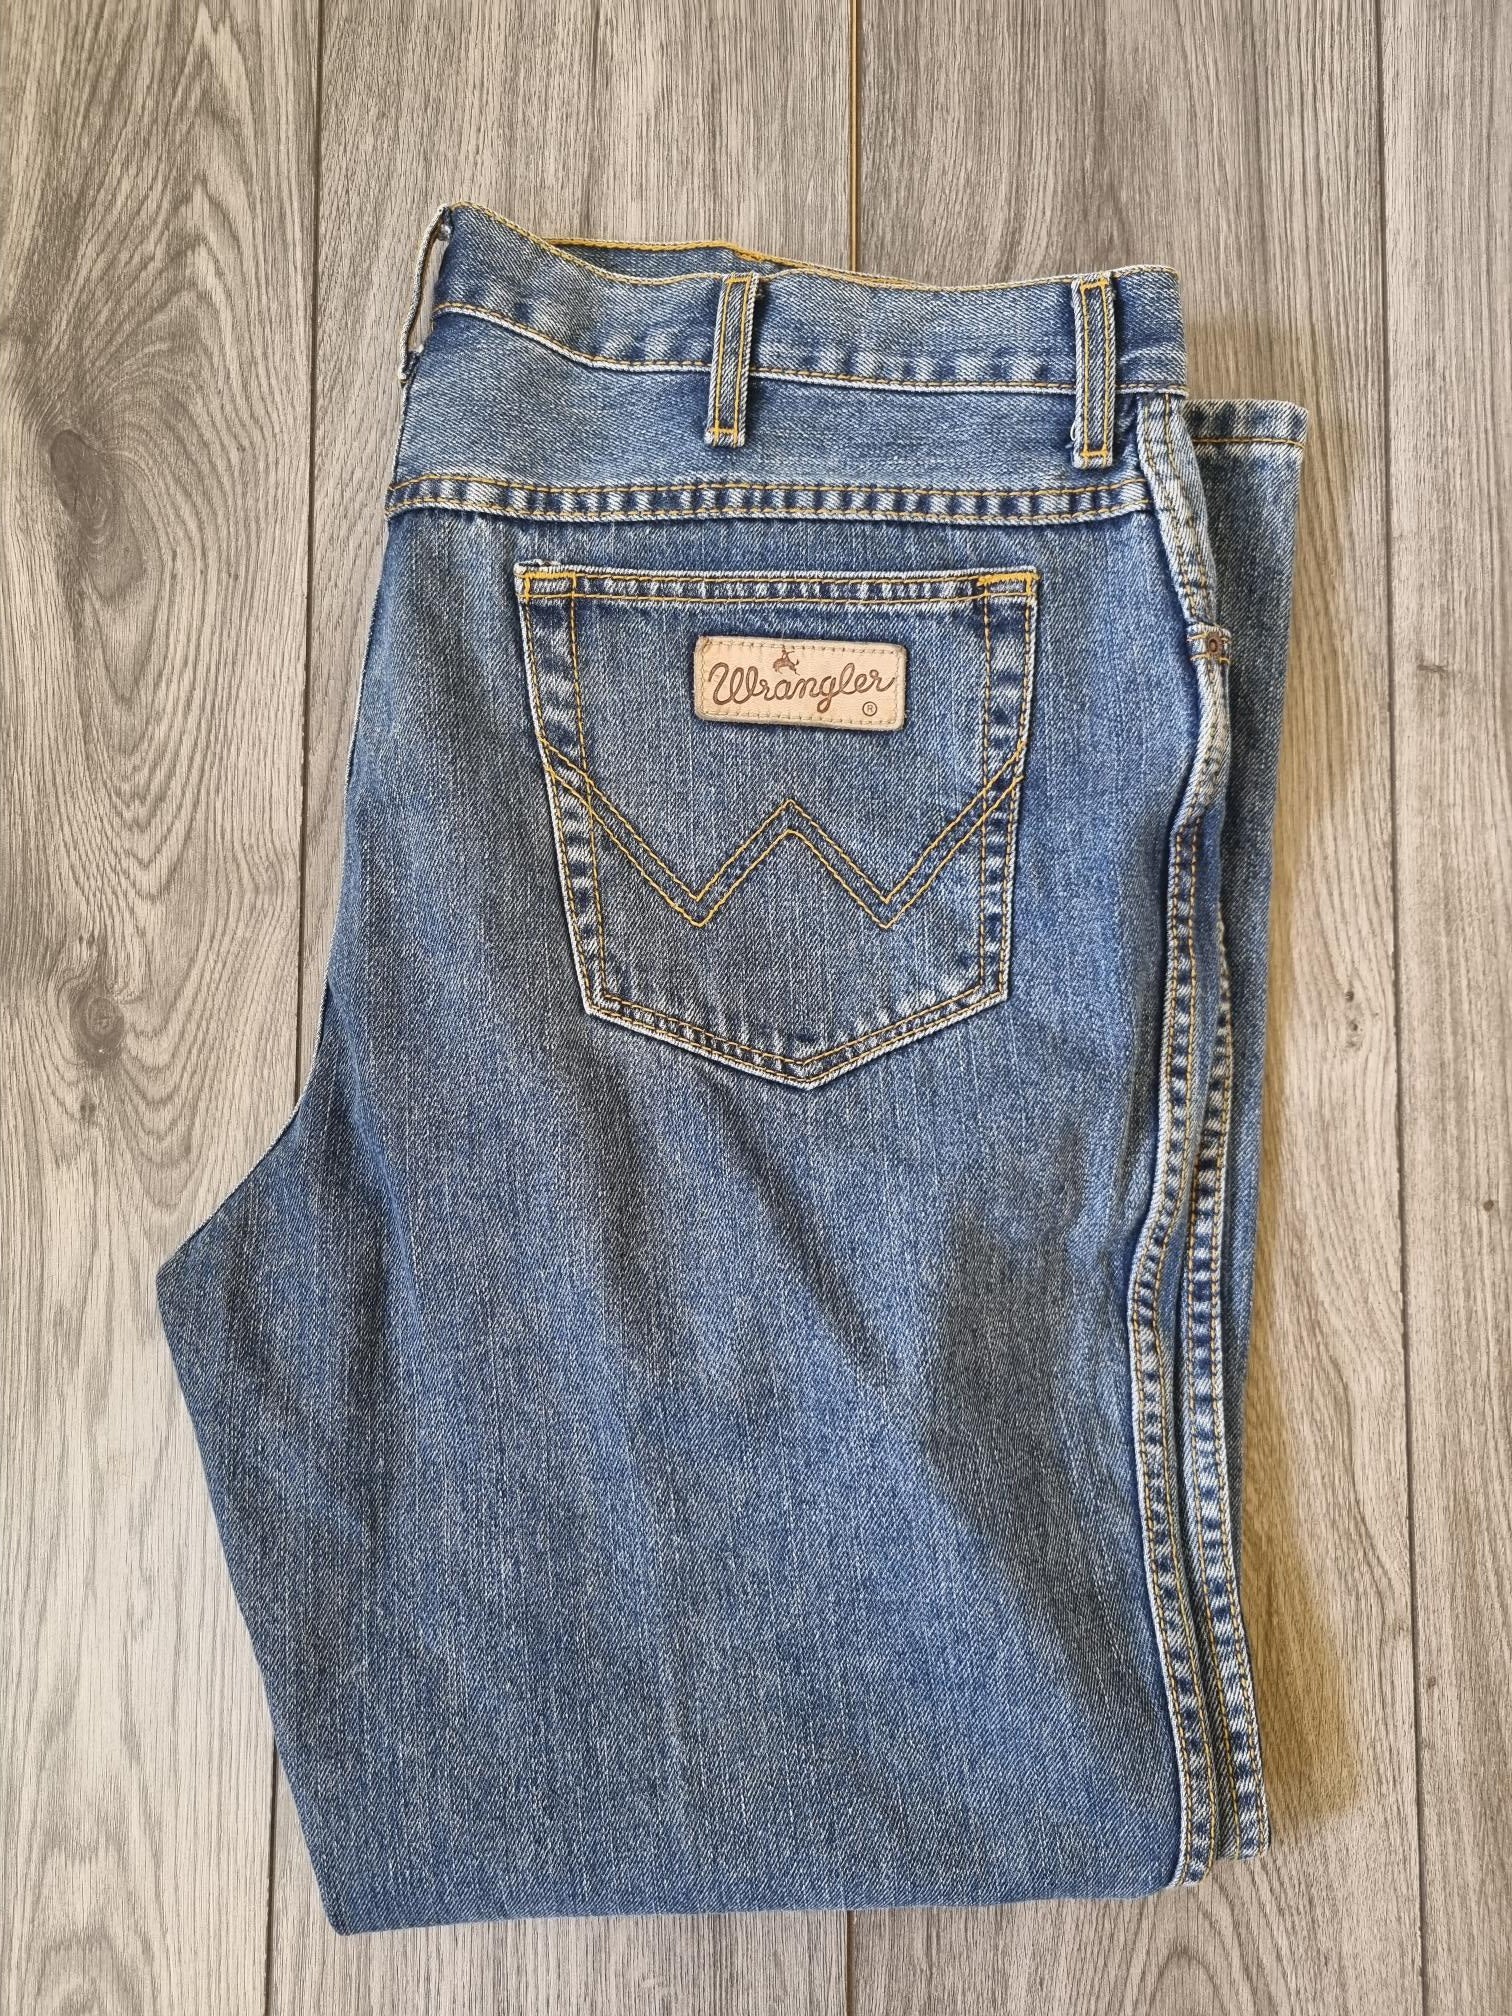 Wrangler Blue Relaxed Fit Jeans W40 L30 – Shop for Shelter